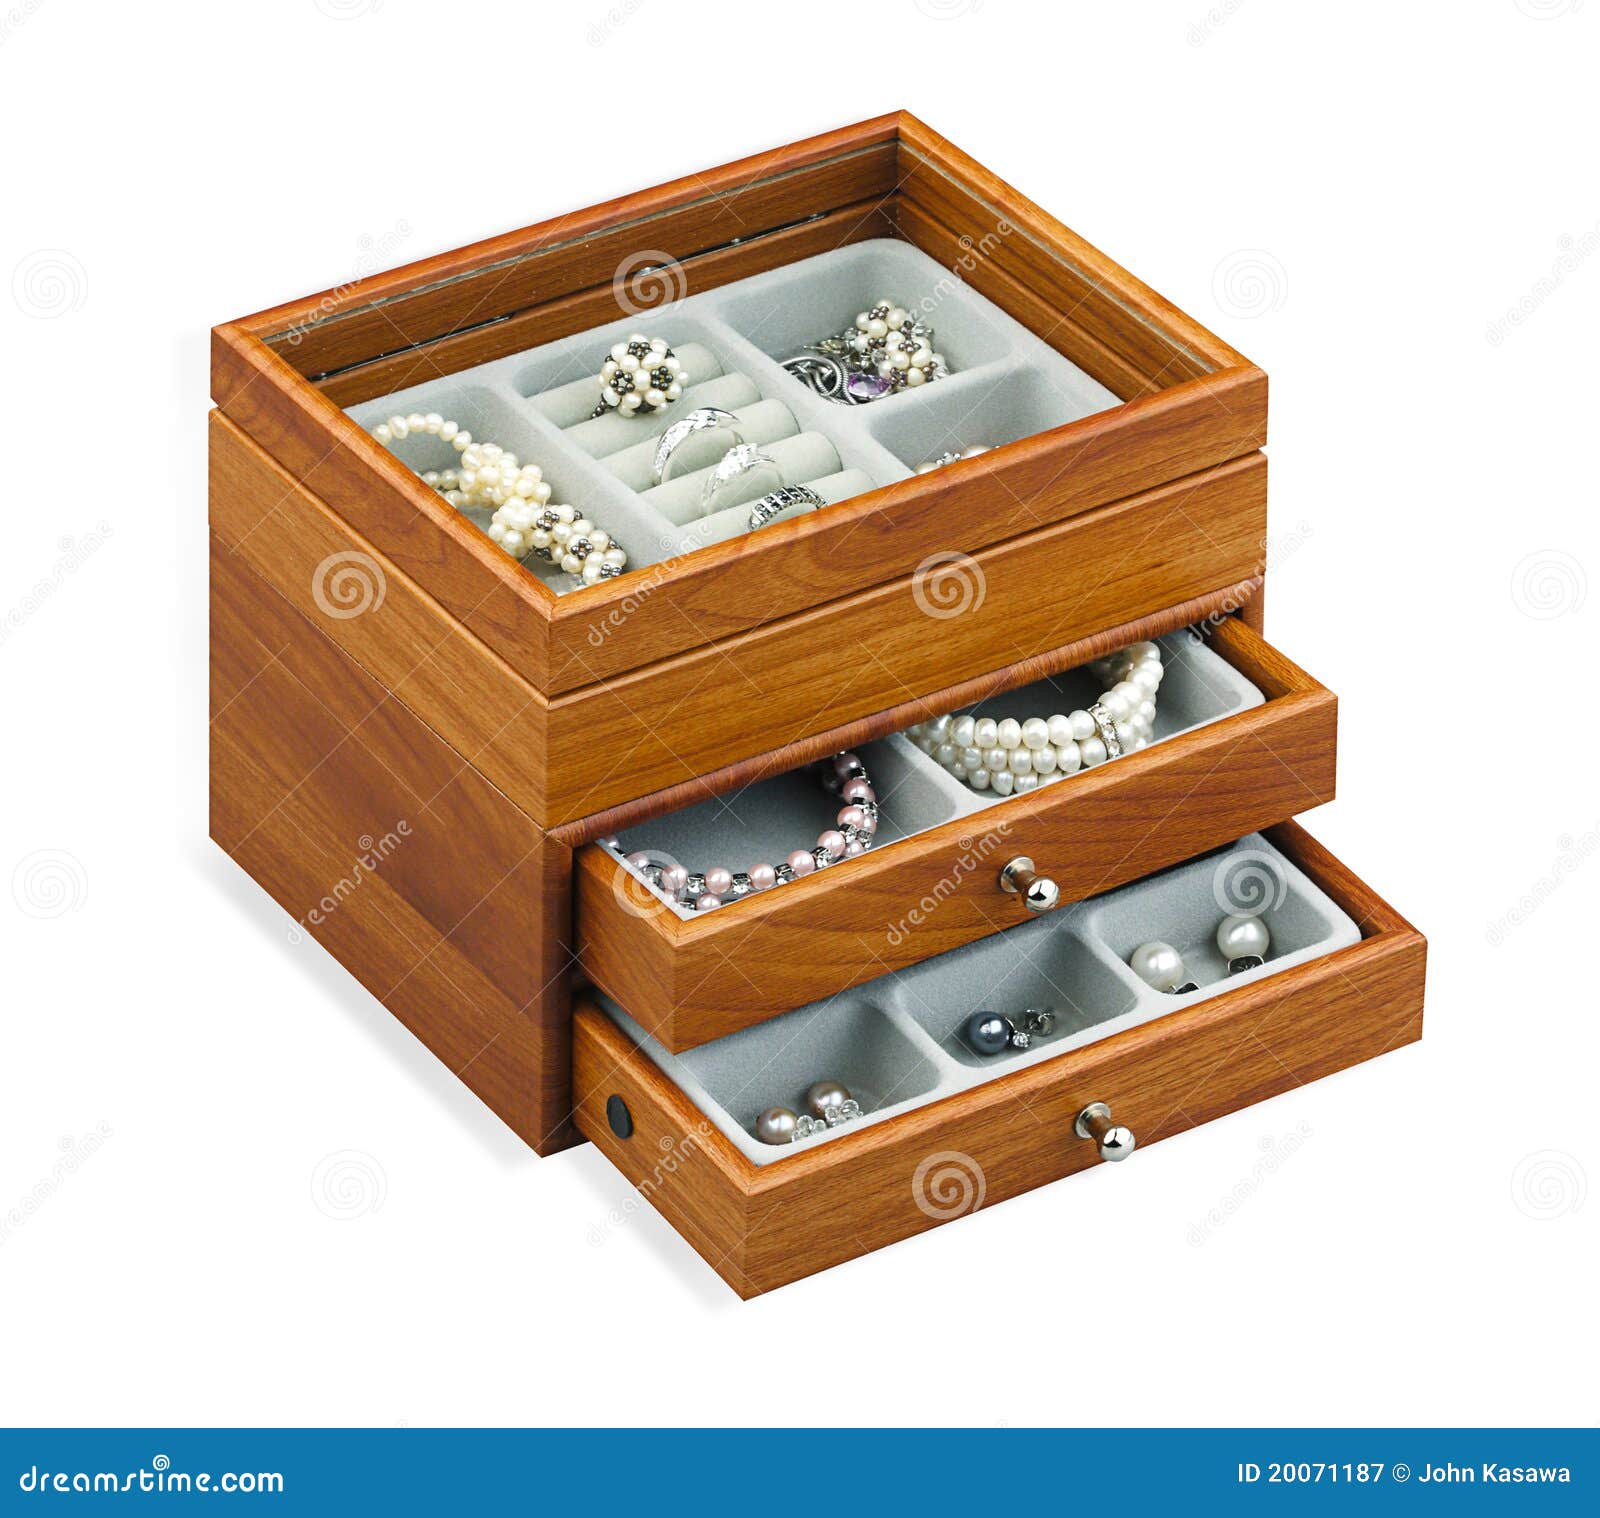 Nice and beautiful wooden jewelry chest box for keep your treasure or 